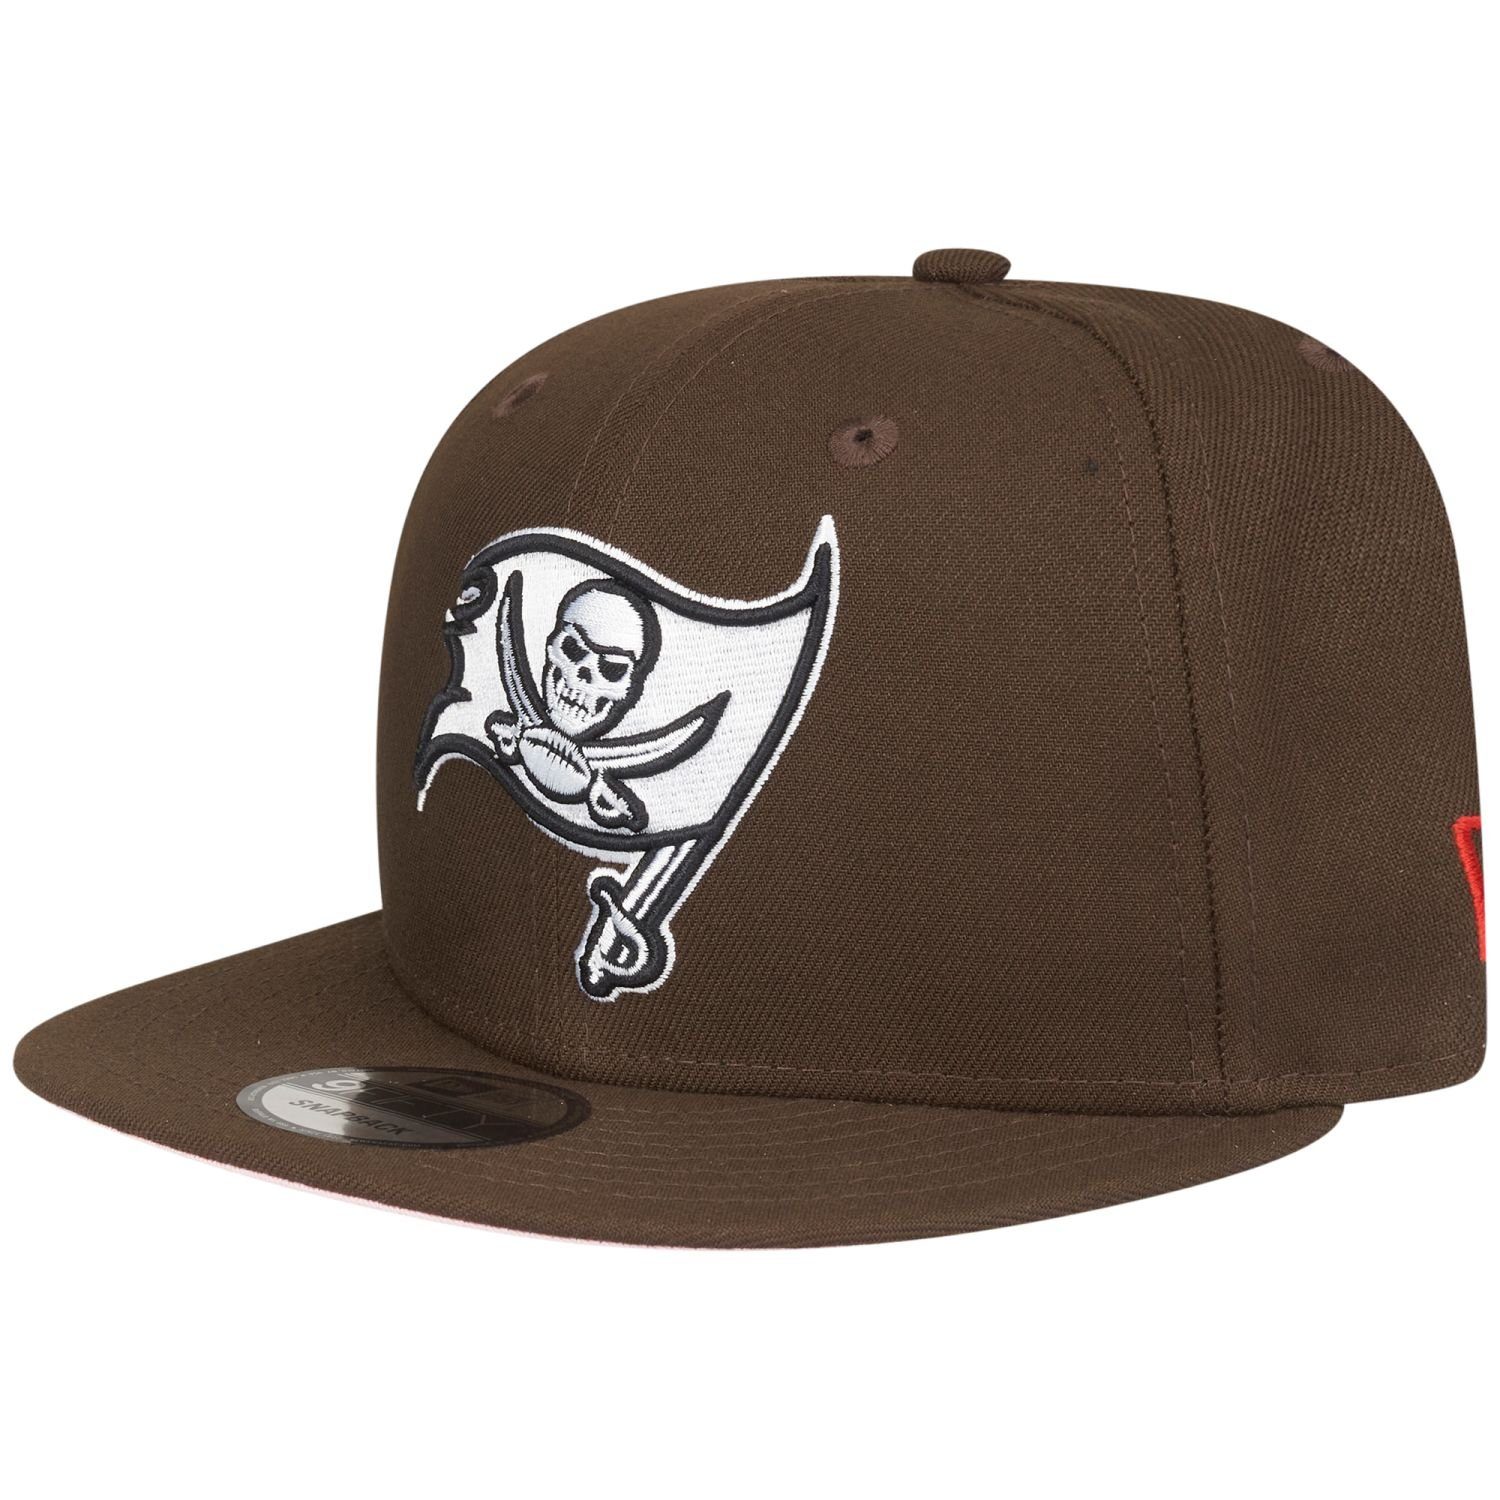 SIDEPATCH Snapback 9Fifty New Bay Buccaneers Era Tampa Cap